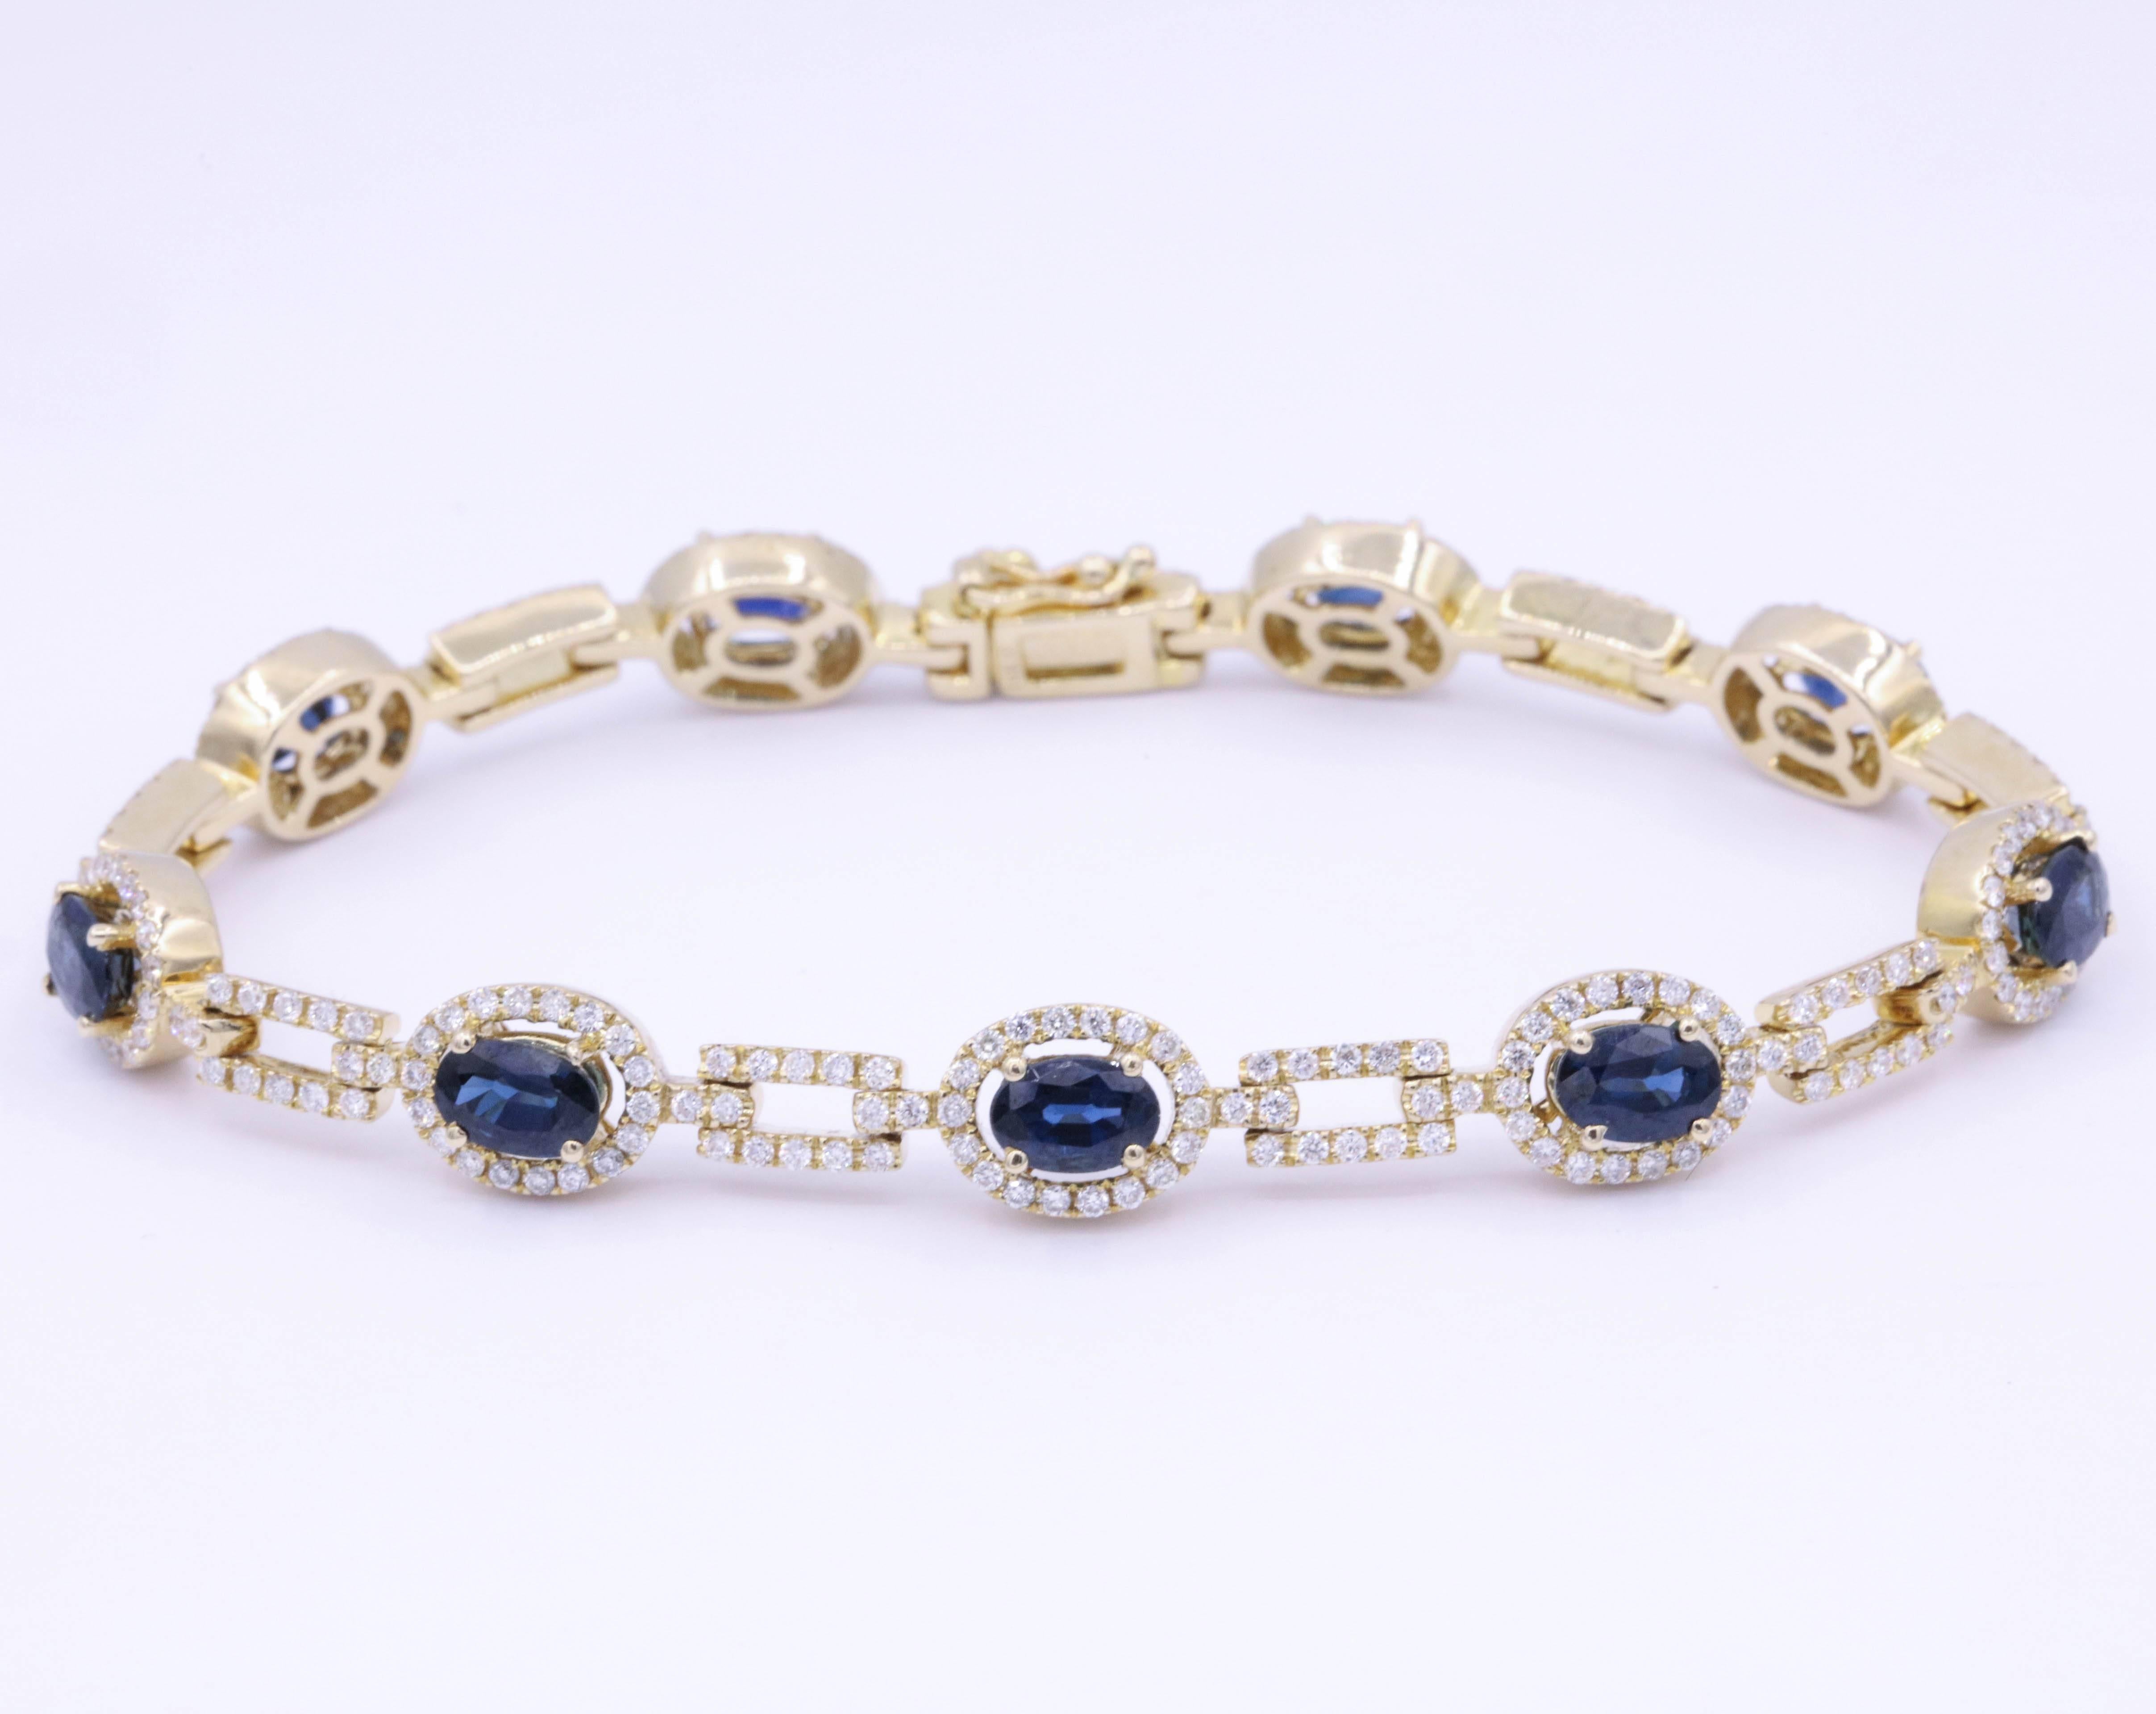 9 Sapphire each one  6x4 mm Total Weight 6.64 Carats
Diamonds: 1.99 Carats
14K Yellow Gold